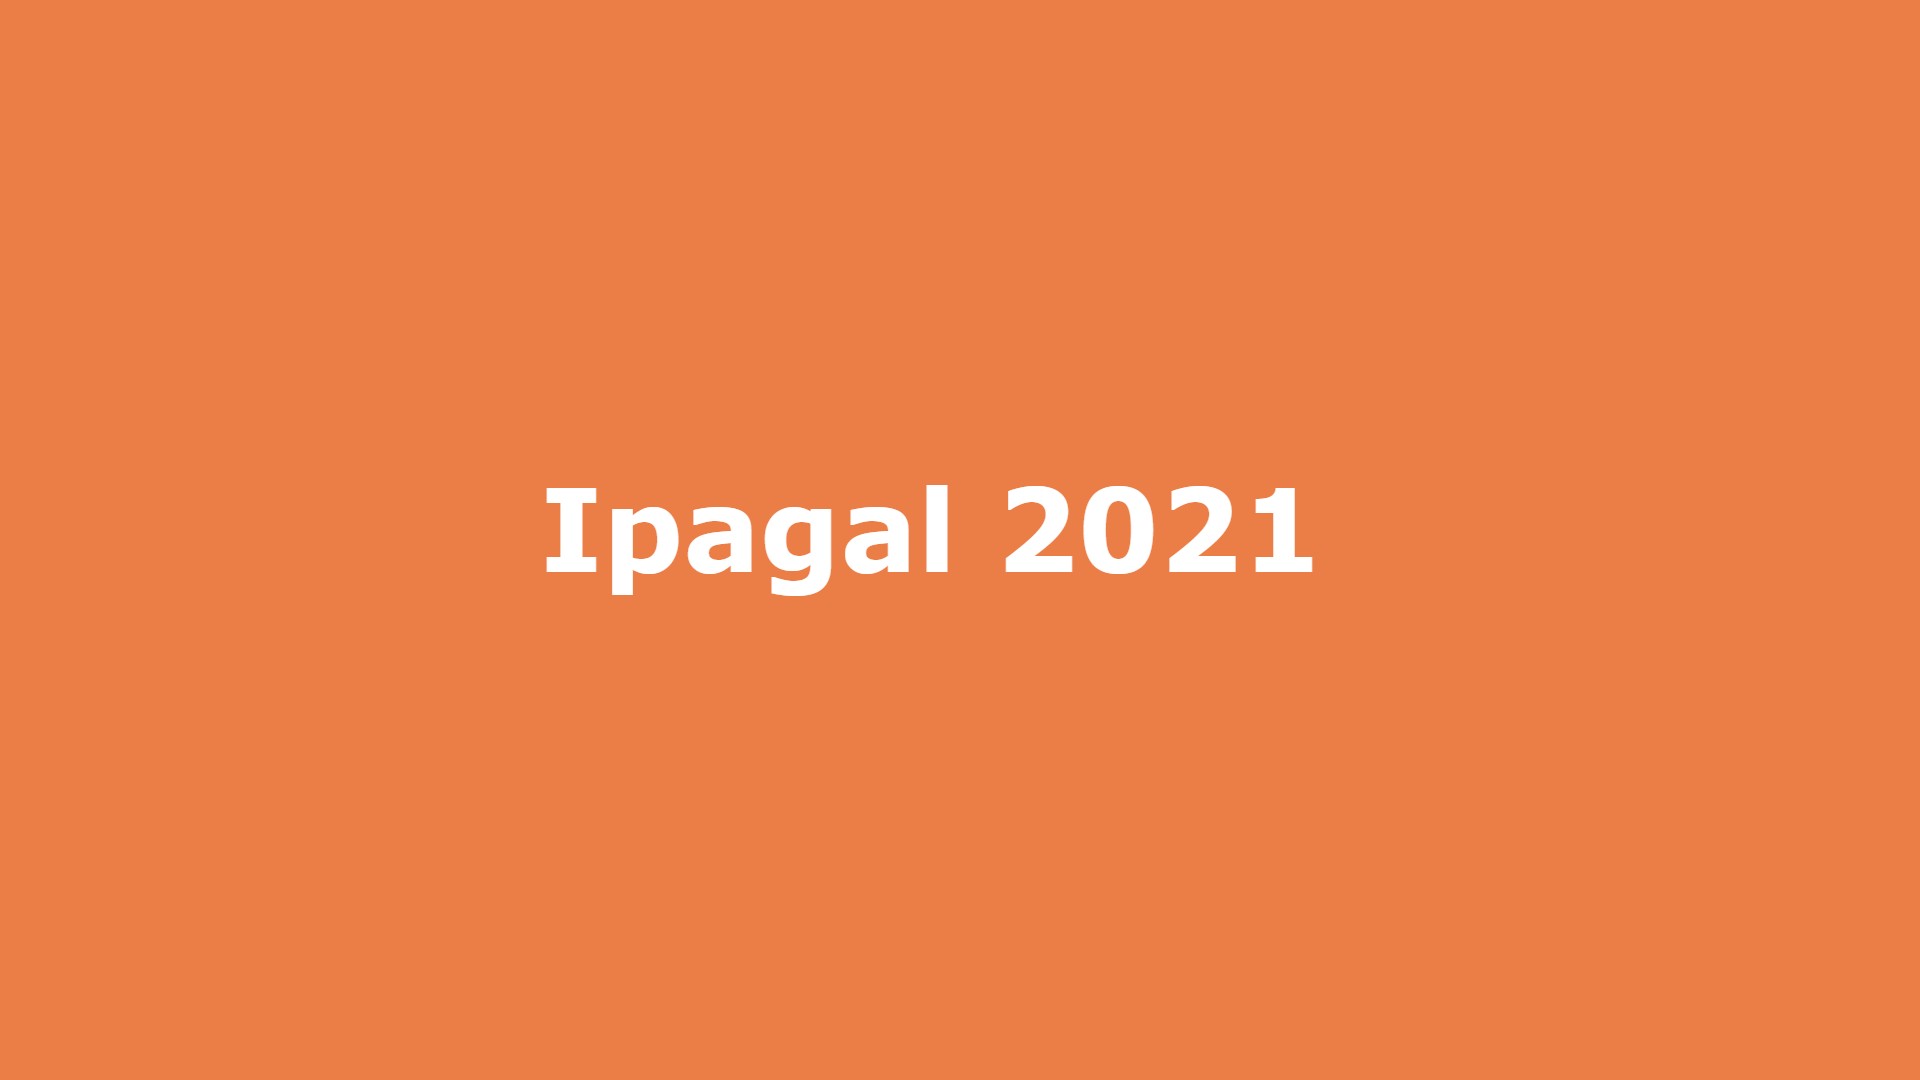 Ipagal Porn Videos - Ipagal 2021: Ipagal Illegal Movies HD Download Website Trends on Google -  Indian News Live Movies Reviews